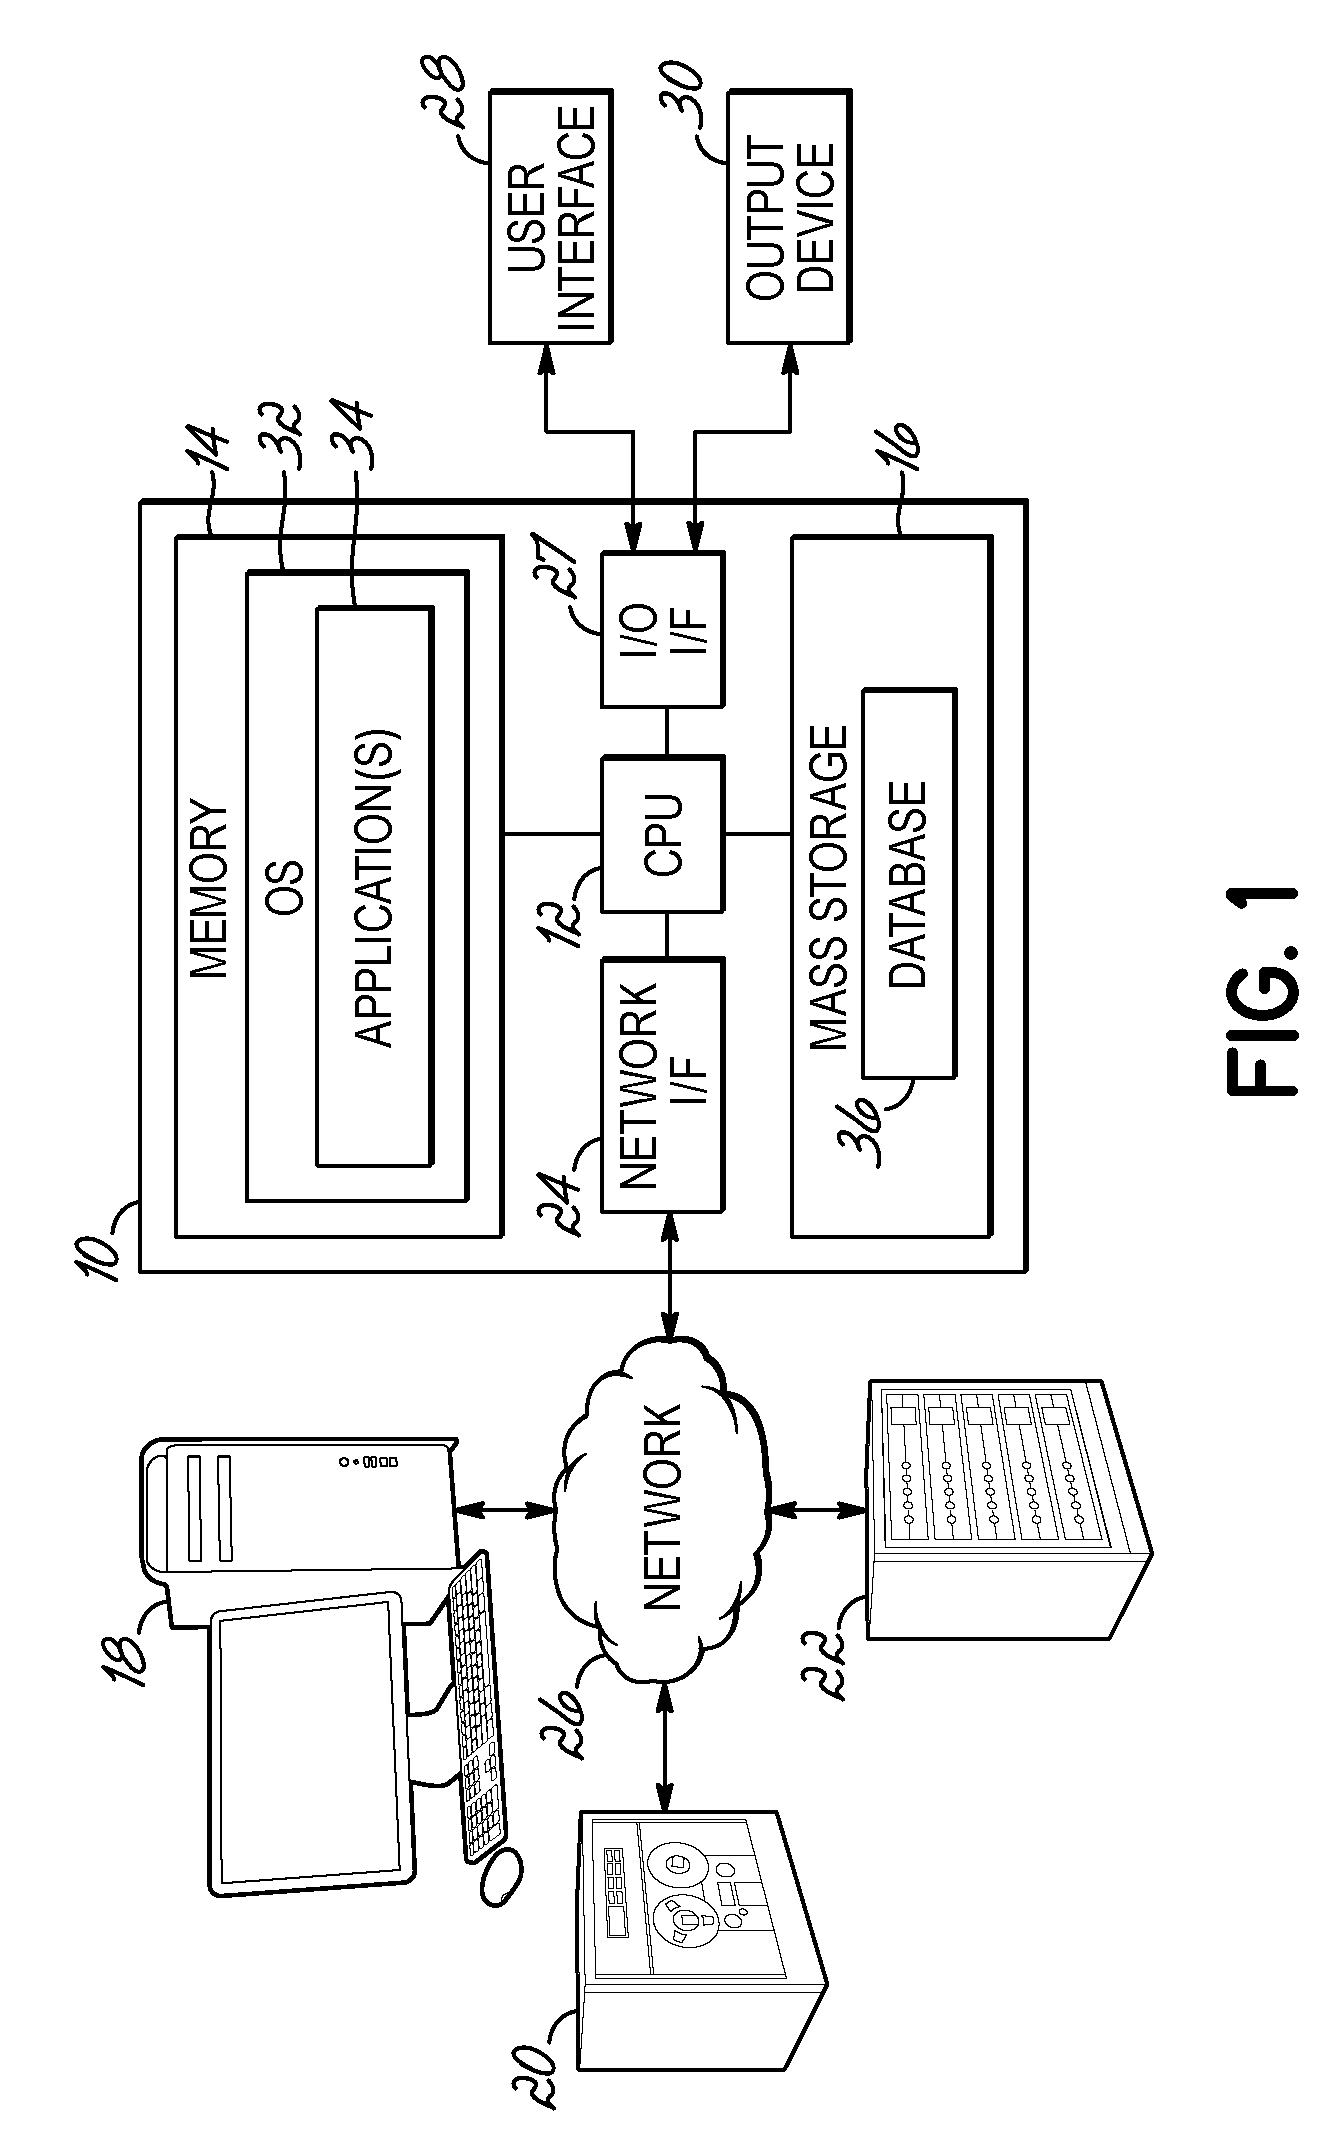 Illustrating and Displaying Time and The Expiration Thereof